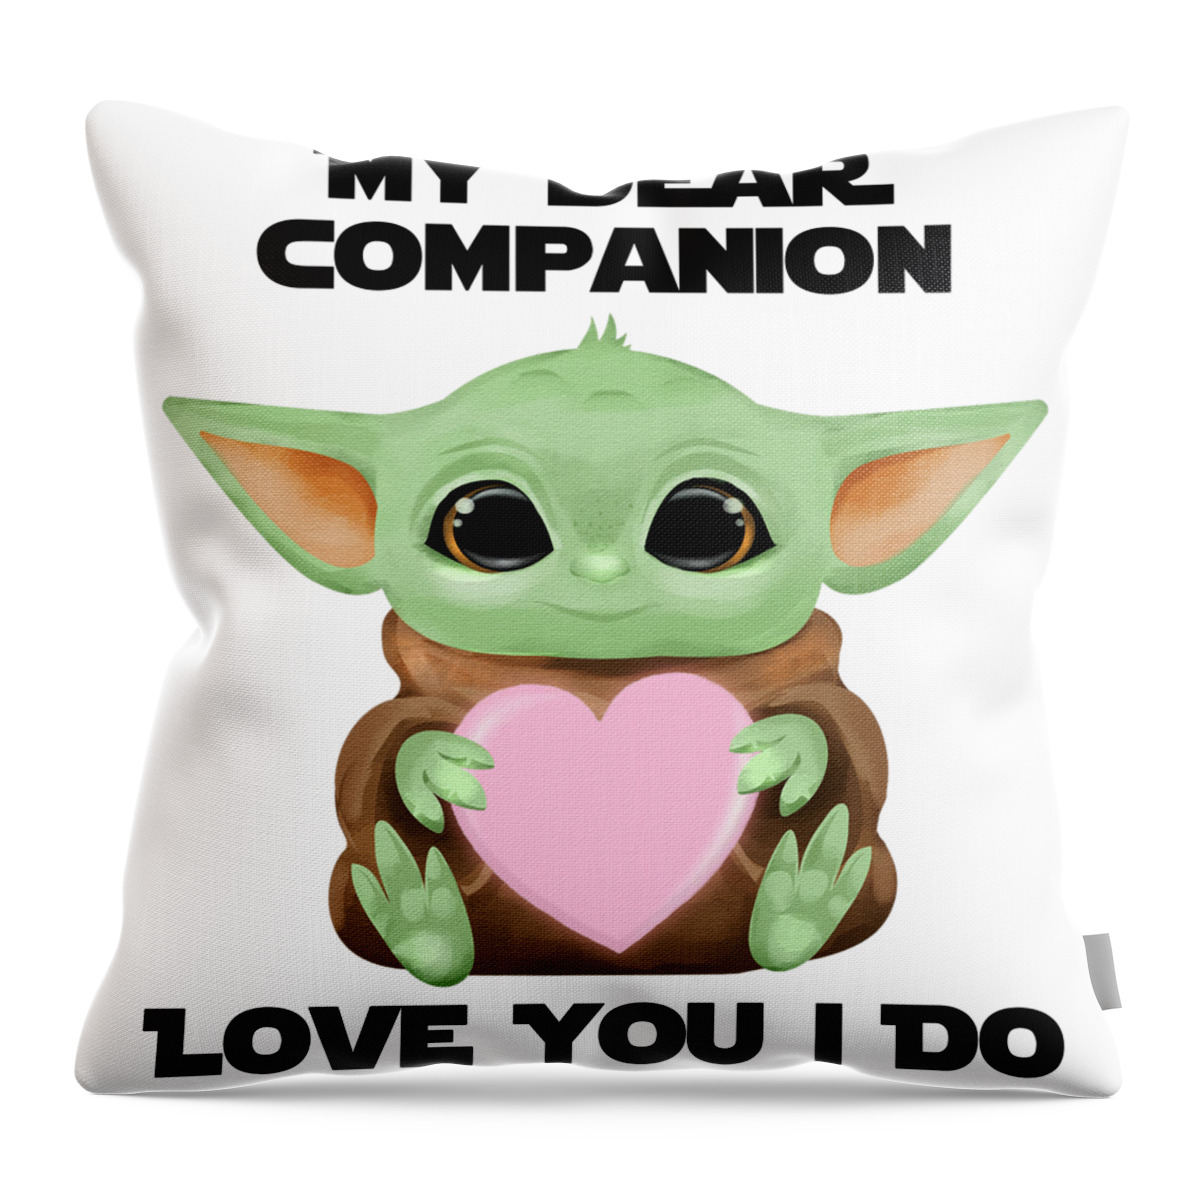 Companion Throw Pillow featuring the digital art My Dear Companion Love You I Do Cute Baby Alien Sci-Fi Movie Lover Valentines Day Heart by Jeff Creation